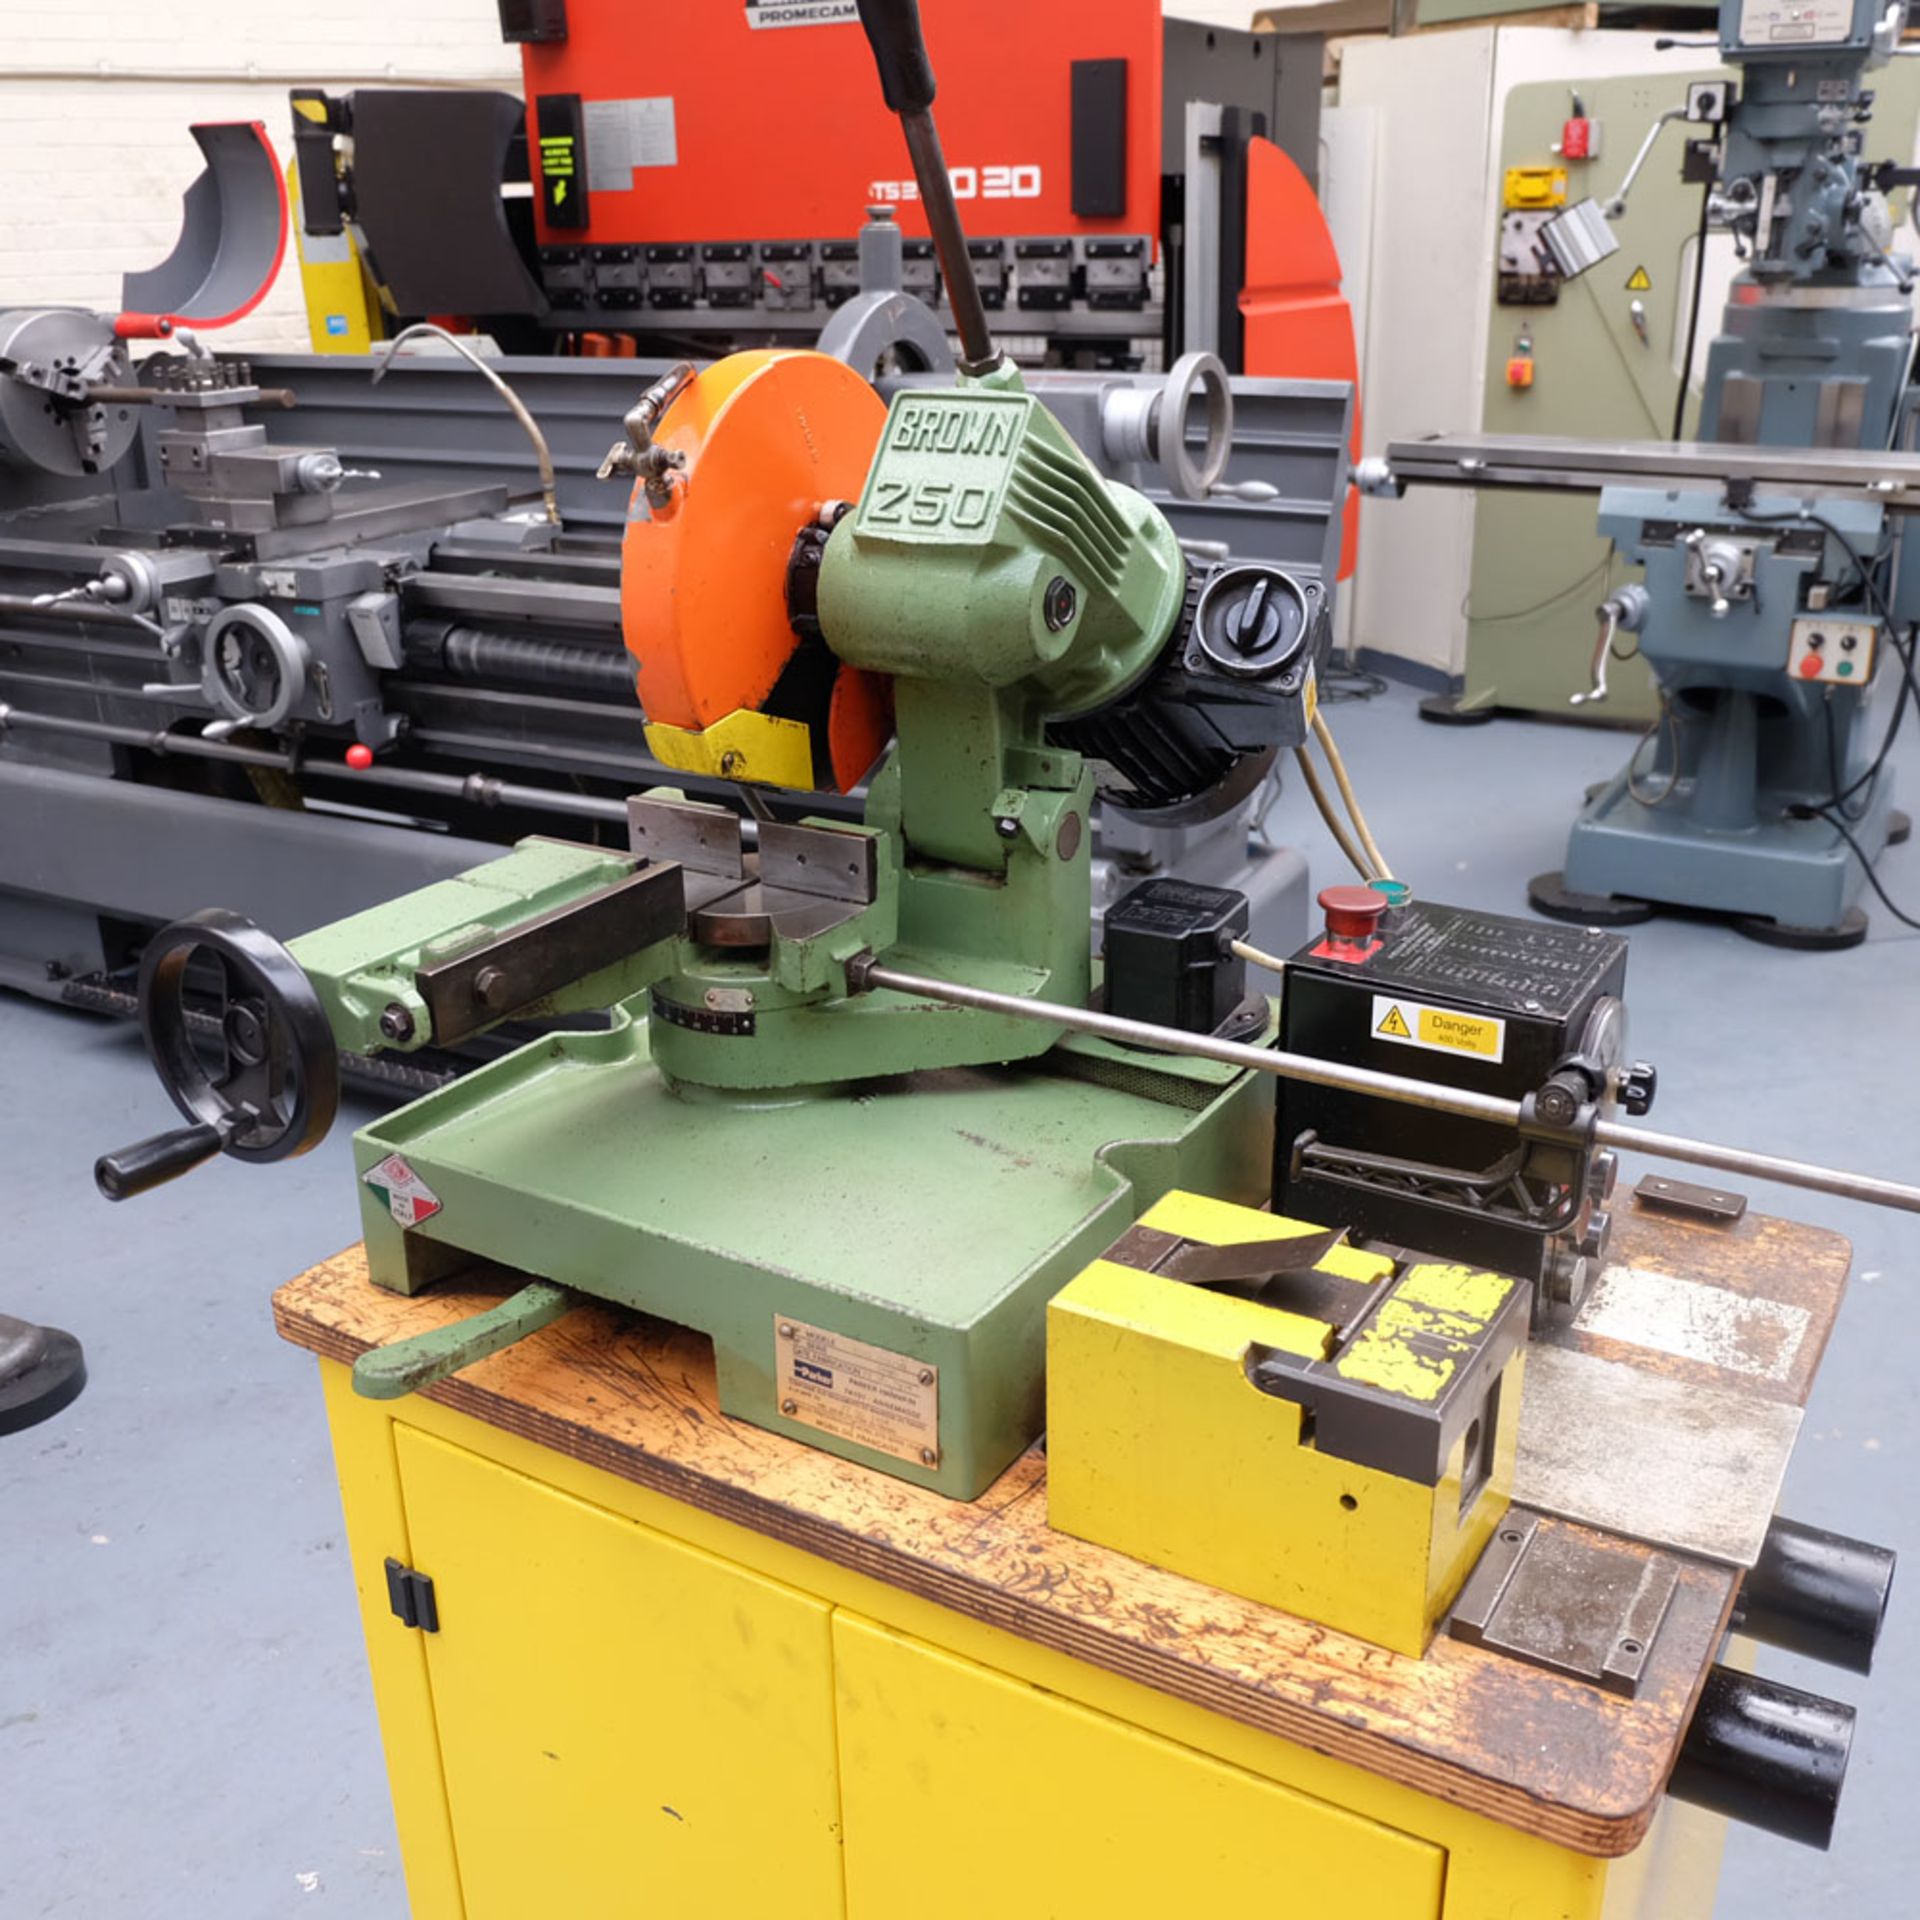 Pedrazzoli Brown 250 Cutting, Deburring and Hydraulic Power Flanging Station On Cabinet. - Image 4 of 13